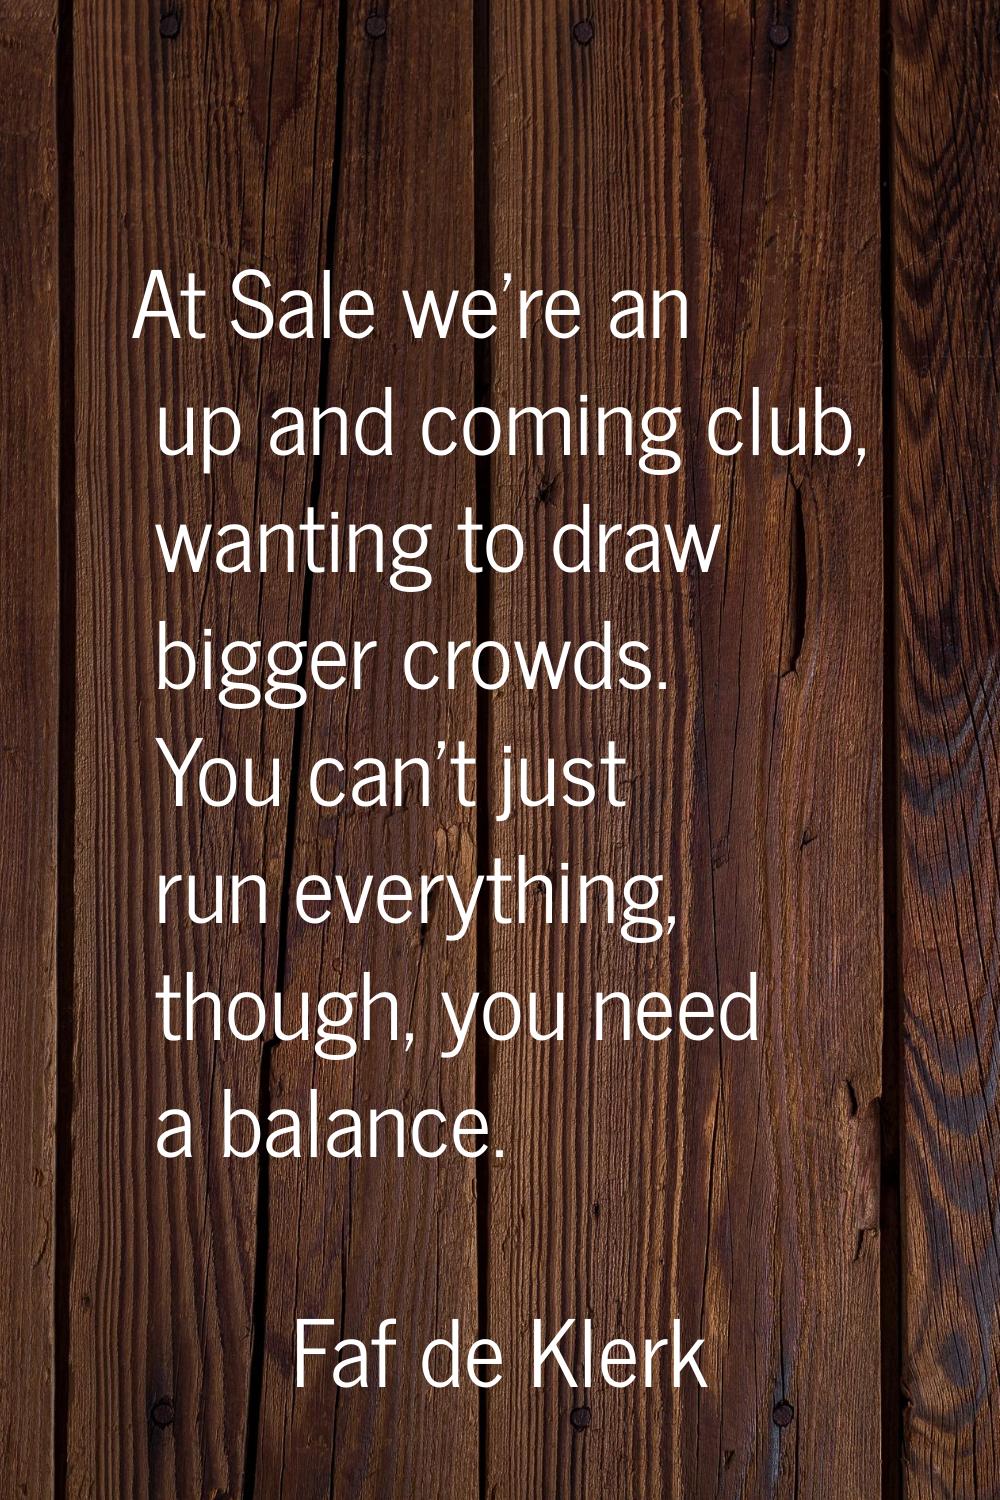 At Sale we're an up and coming club, wanting to draw bigger crowds. You can't just run everything, 